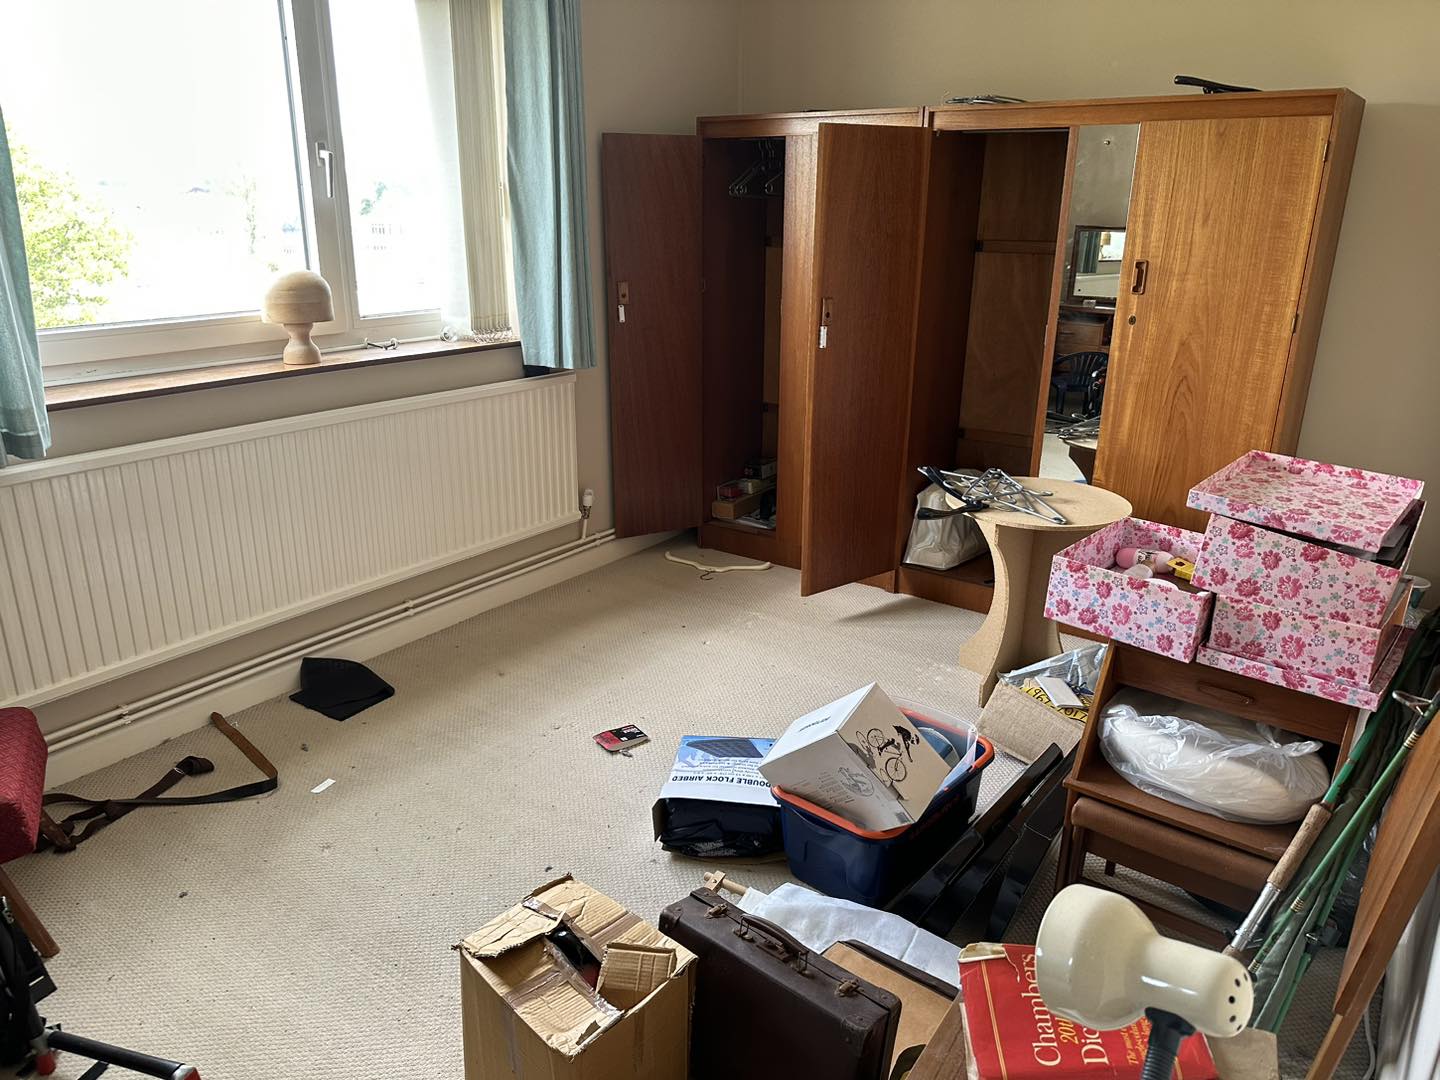 A photo of a large bedroom full of waste